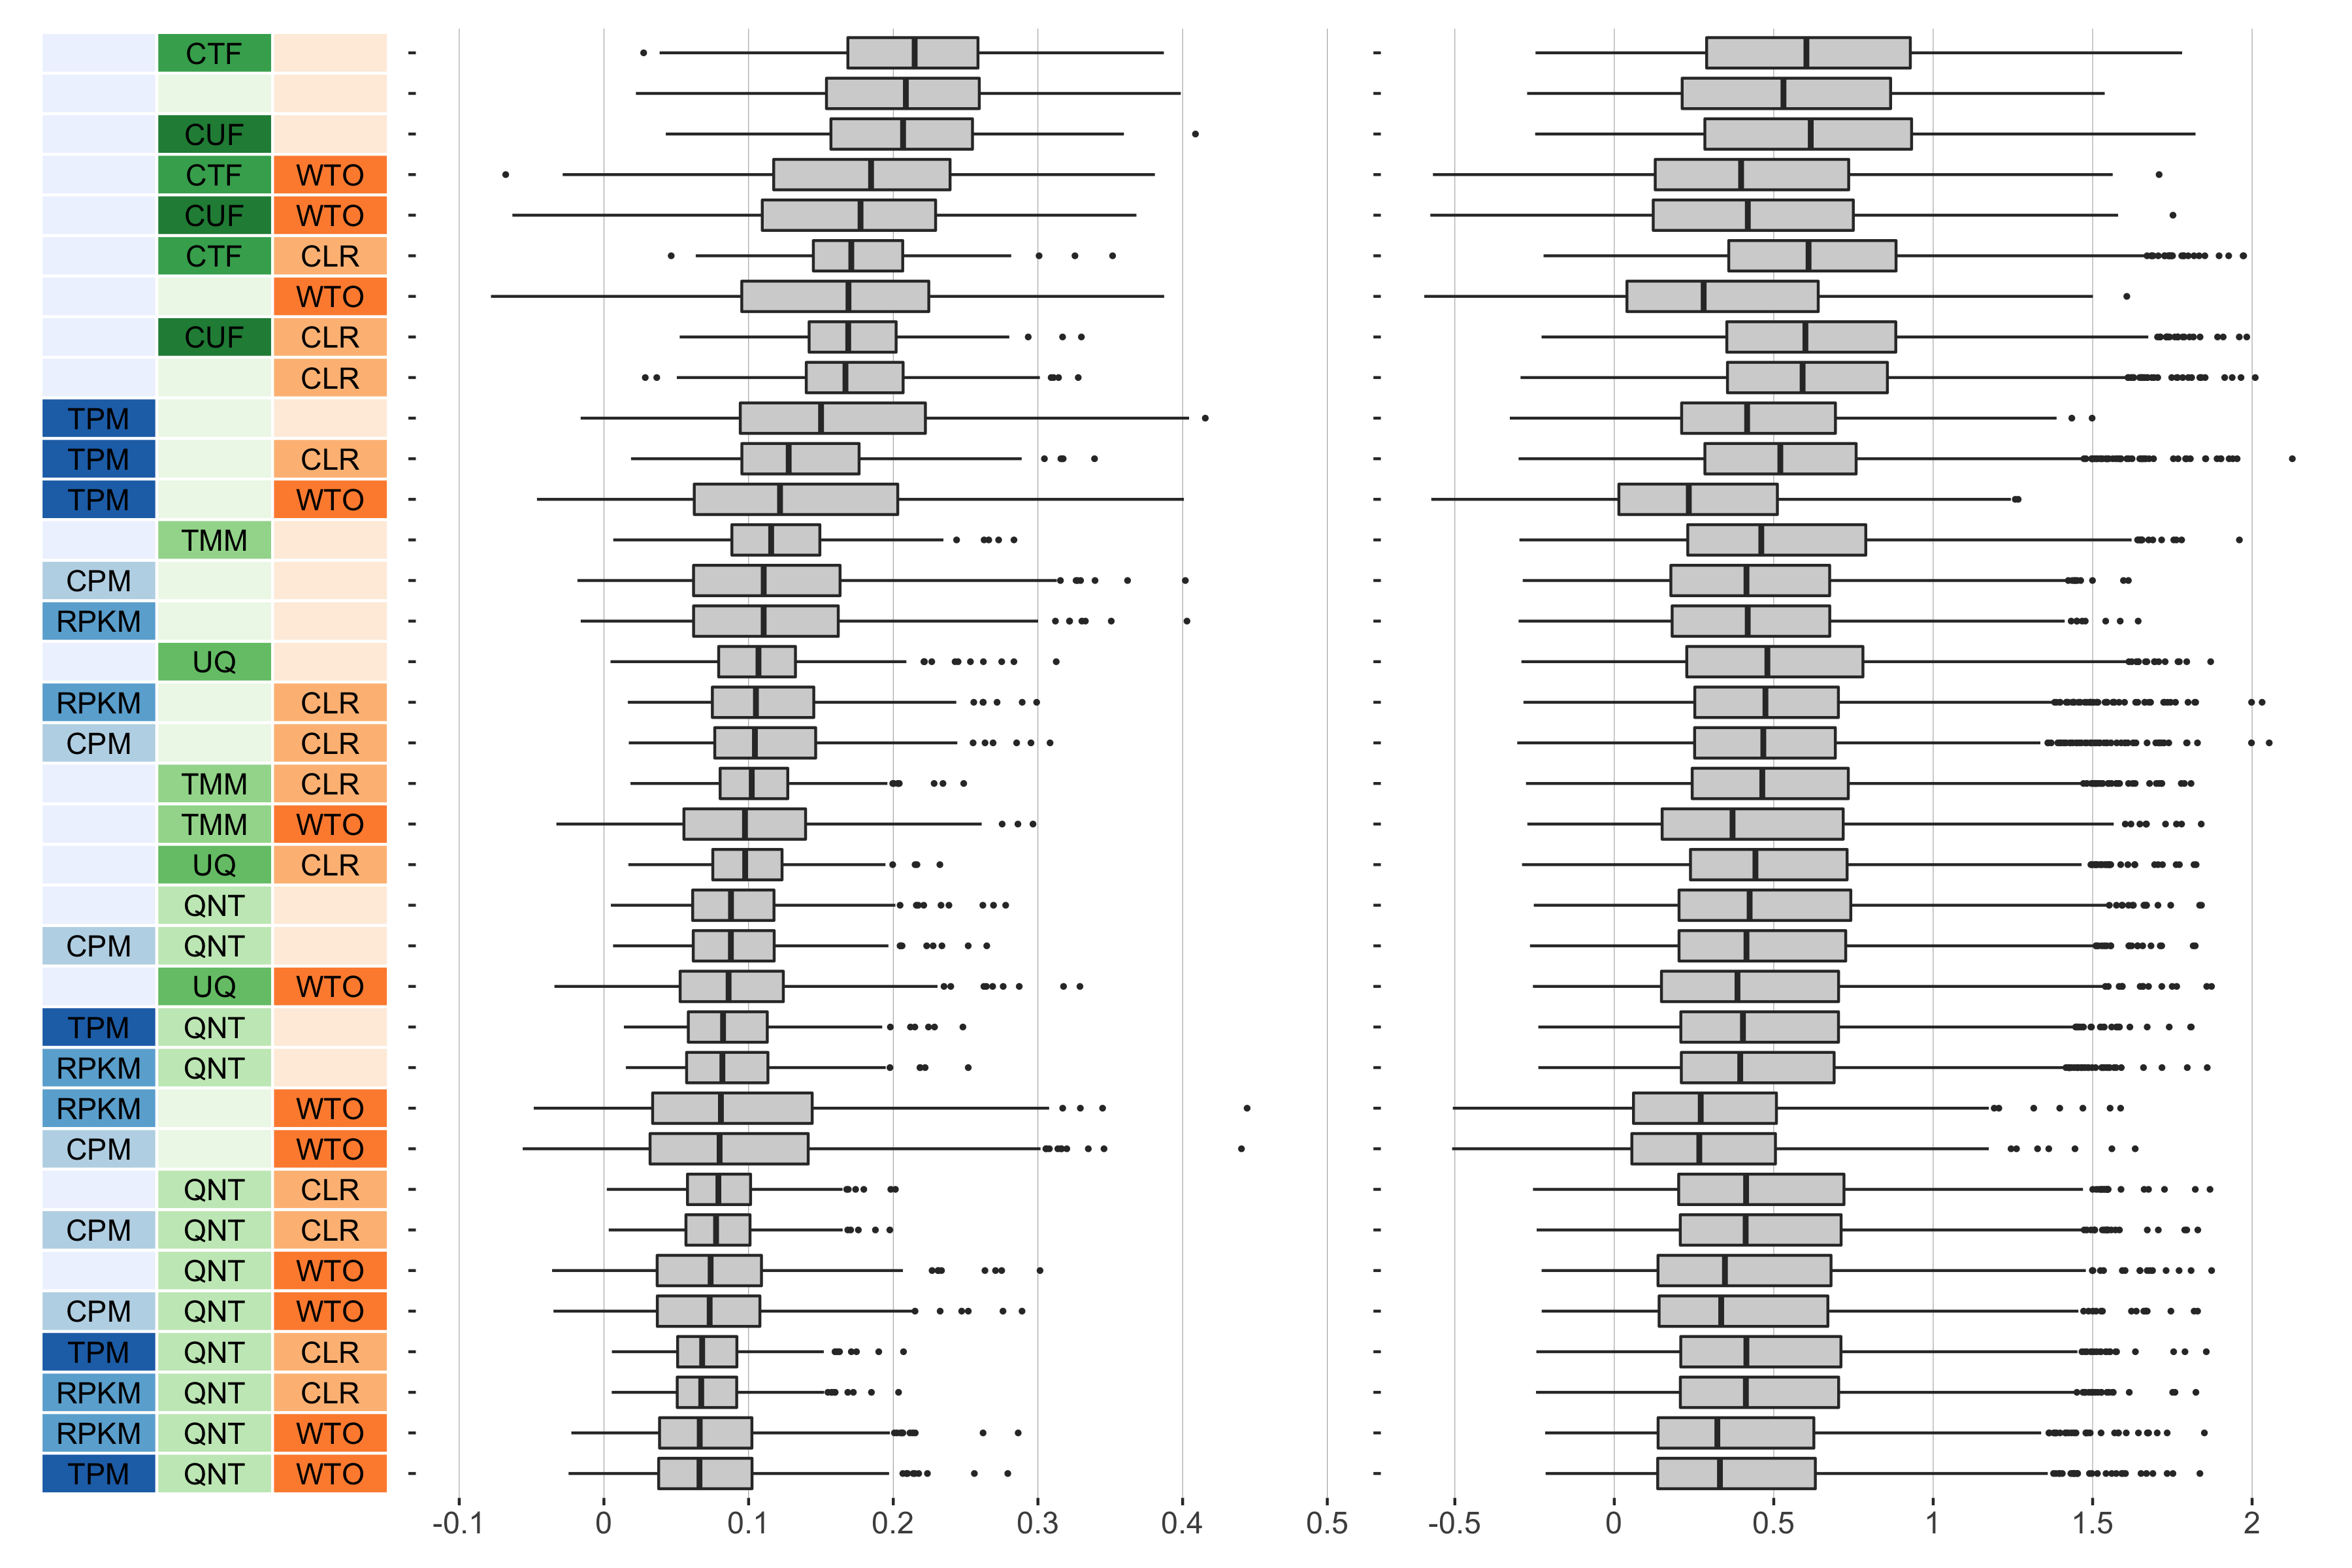 **Overall performance of workflows.** The plots show the aggregate accuracy of all resampled GTEx coexpression networks of a given sample size resulting from each individual workflow evaluated using the (**left**) tissue-naive and (**right**) tissue-aware gold standards. The workflows (rows) are described in terms of the specific method used in the within-sample normalization (blues), between-sample normalization (greens), and network transformation (oranges) stages. The performance of each workflow is presented as boxplots that summarizes the log2(auPRC/prior) of each workflow where auPRC is the area under the precision recall curve. The workflows are ordered by their median log2(auPRC/prior) for the tissue-naive data.